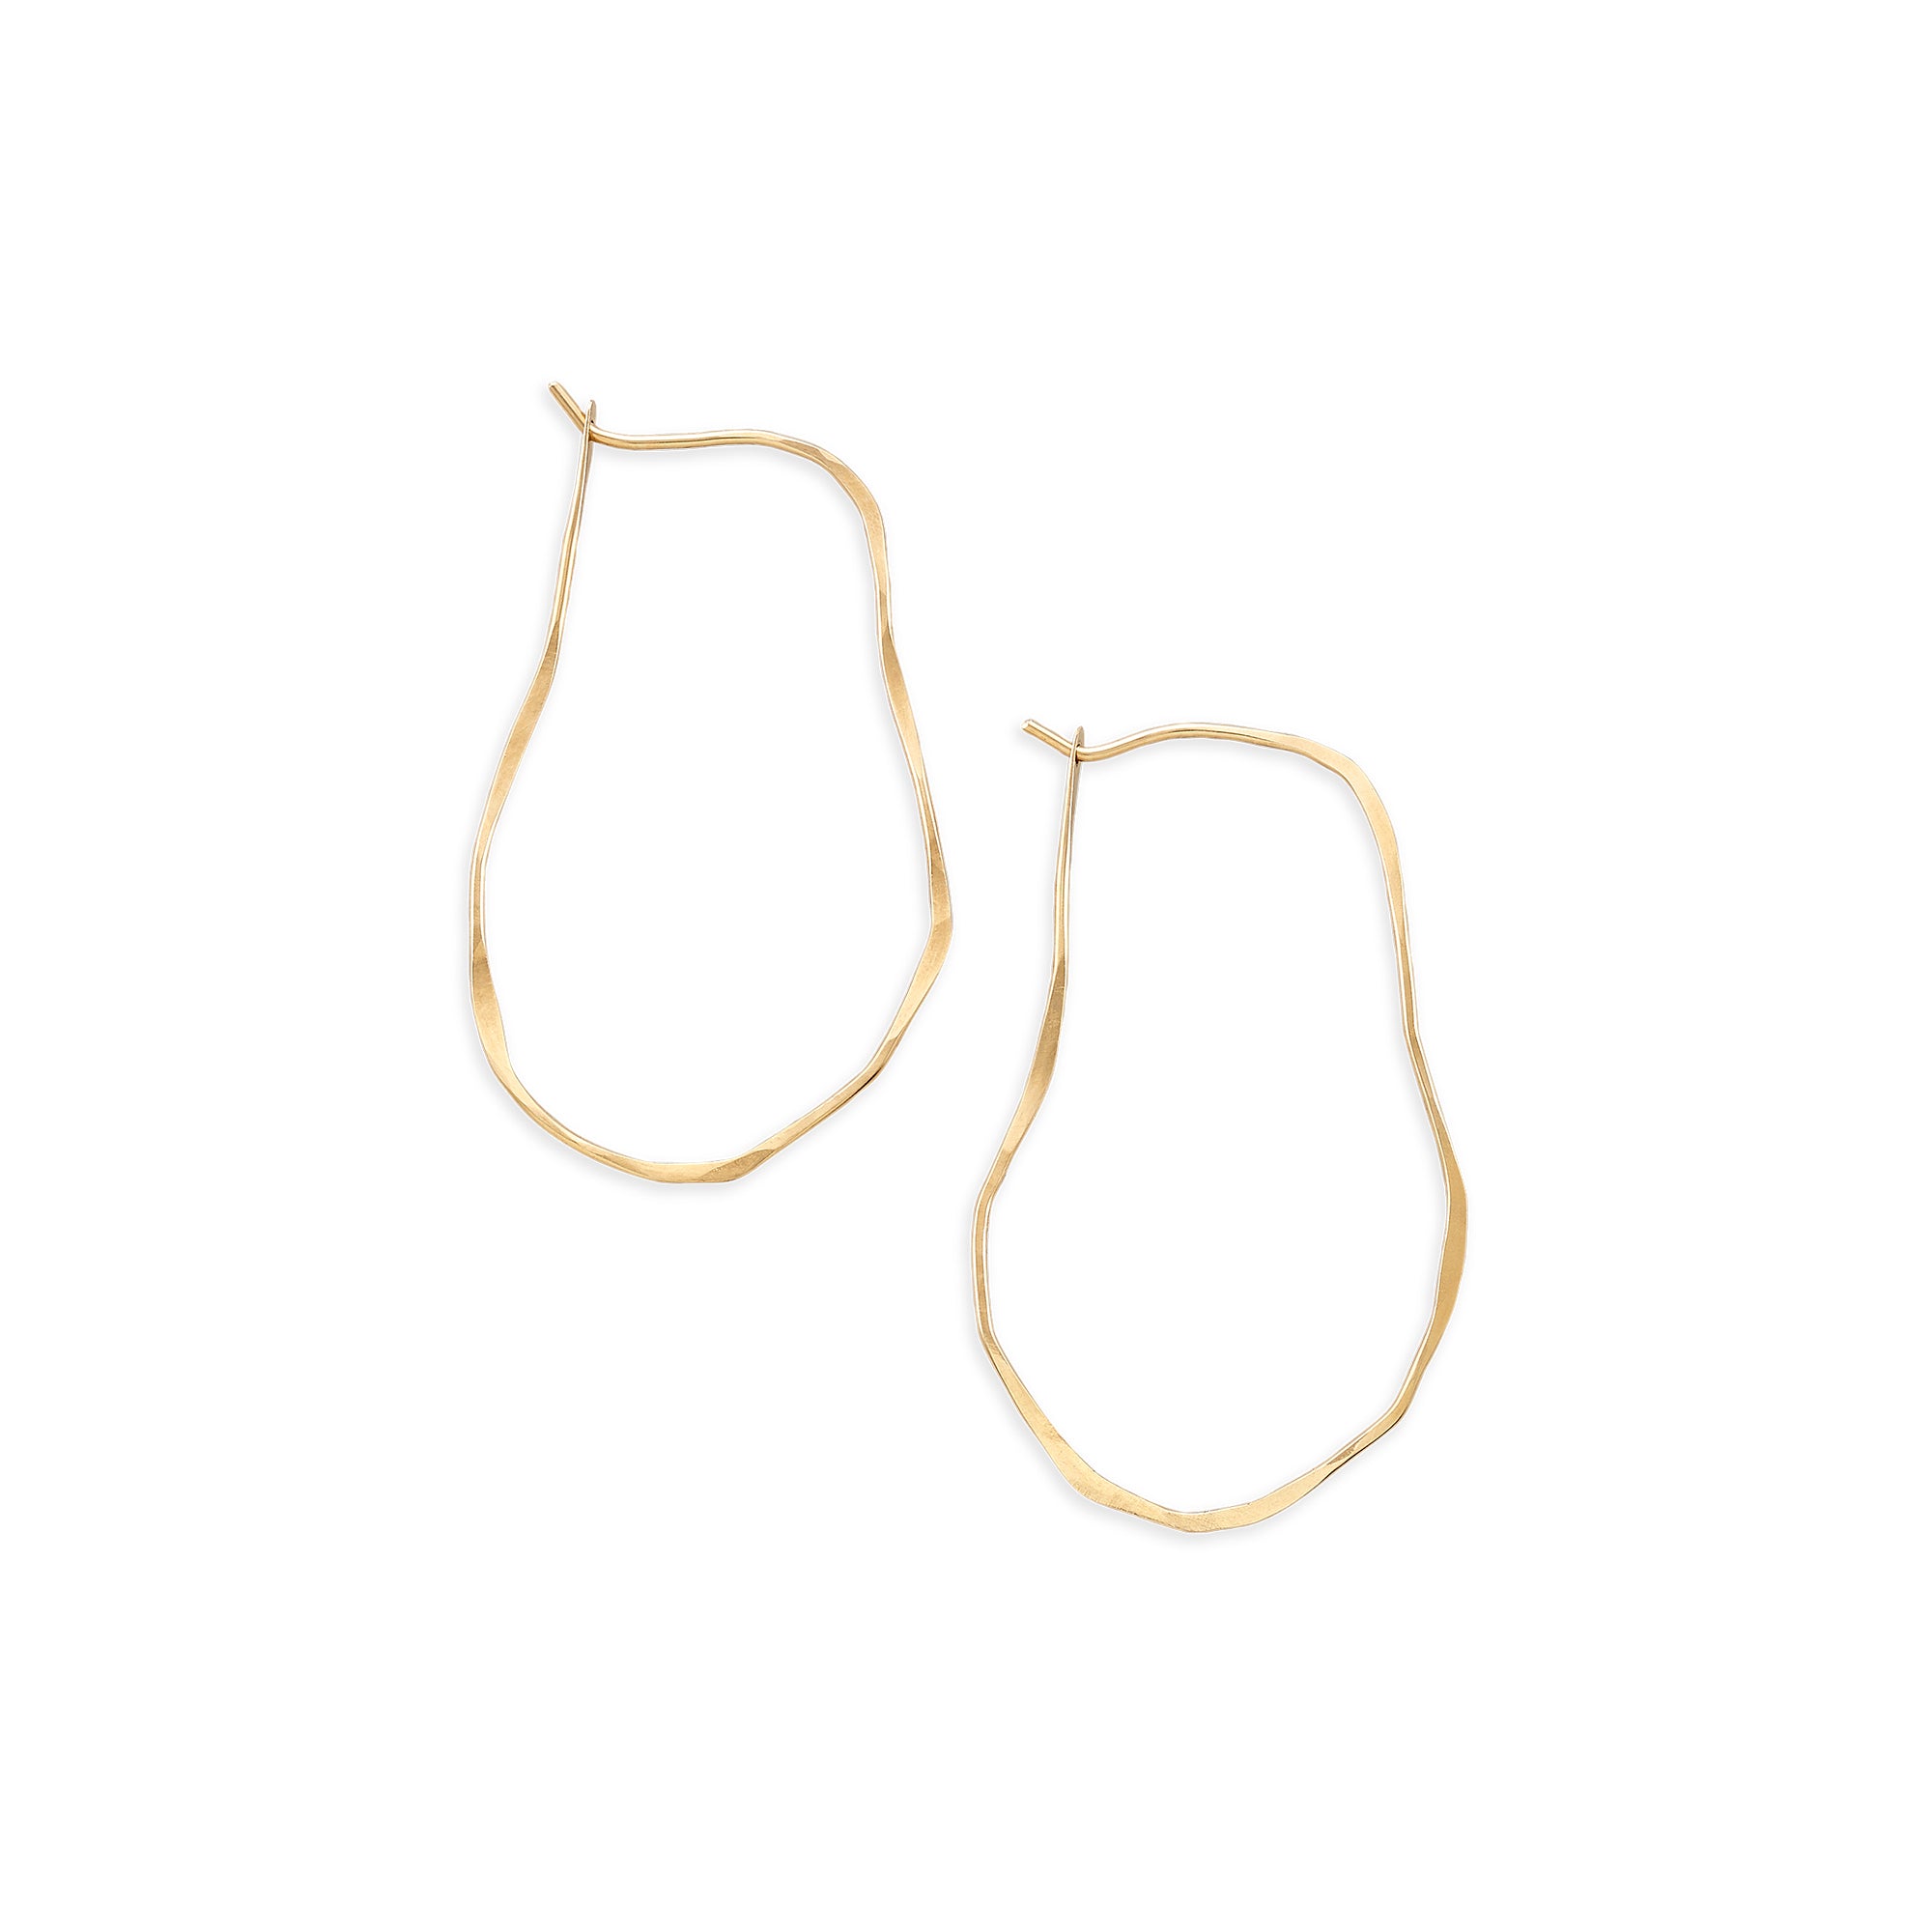 14k gold Possible Futures Hoops, these forged earrings are one of a kind pieces from our collaboration with Callen Thompson 